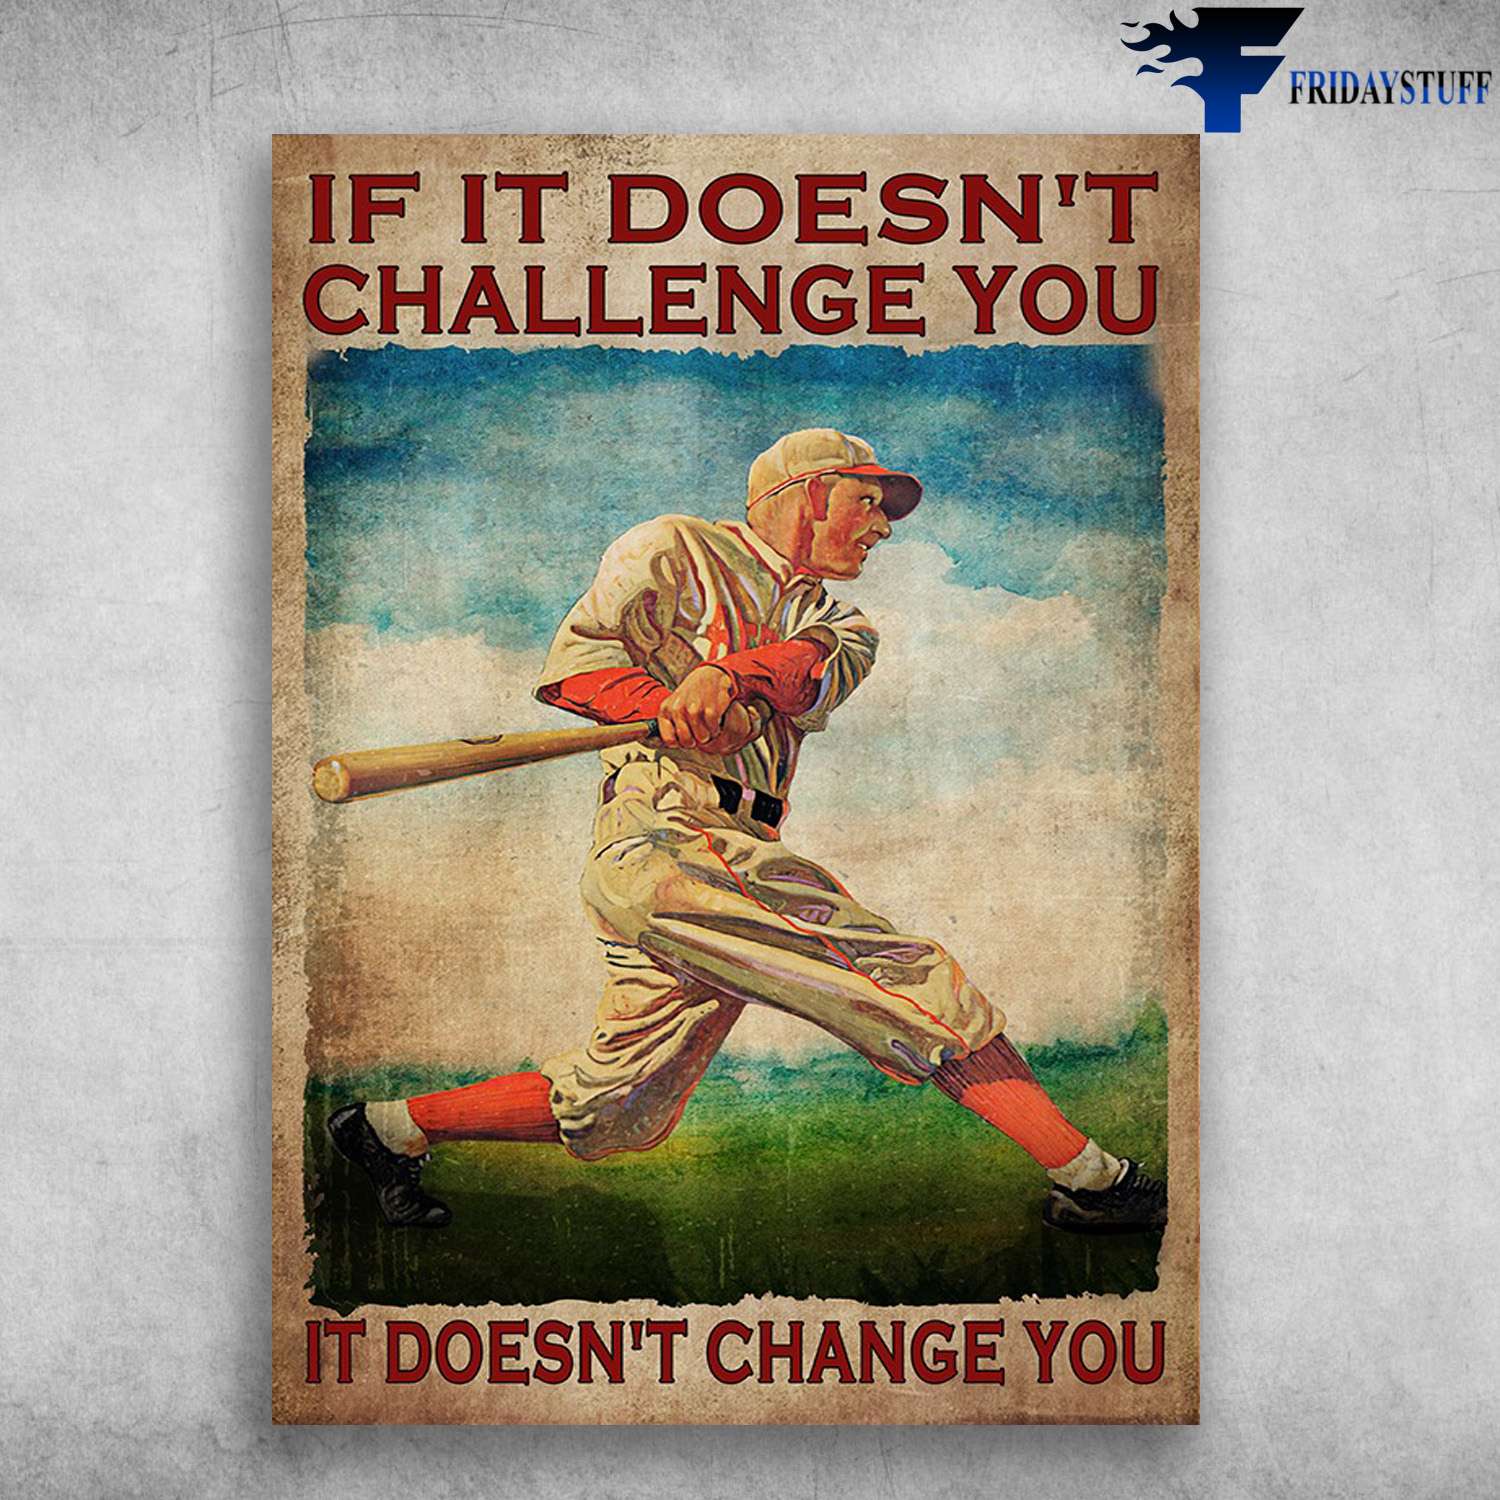 Baseball Player - If It Doesn't Challenge You, It Doesn't Change You